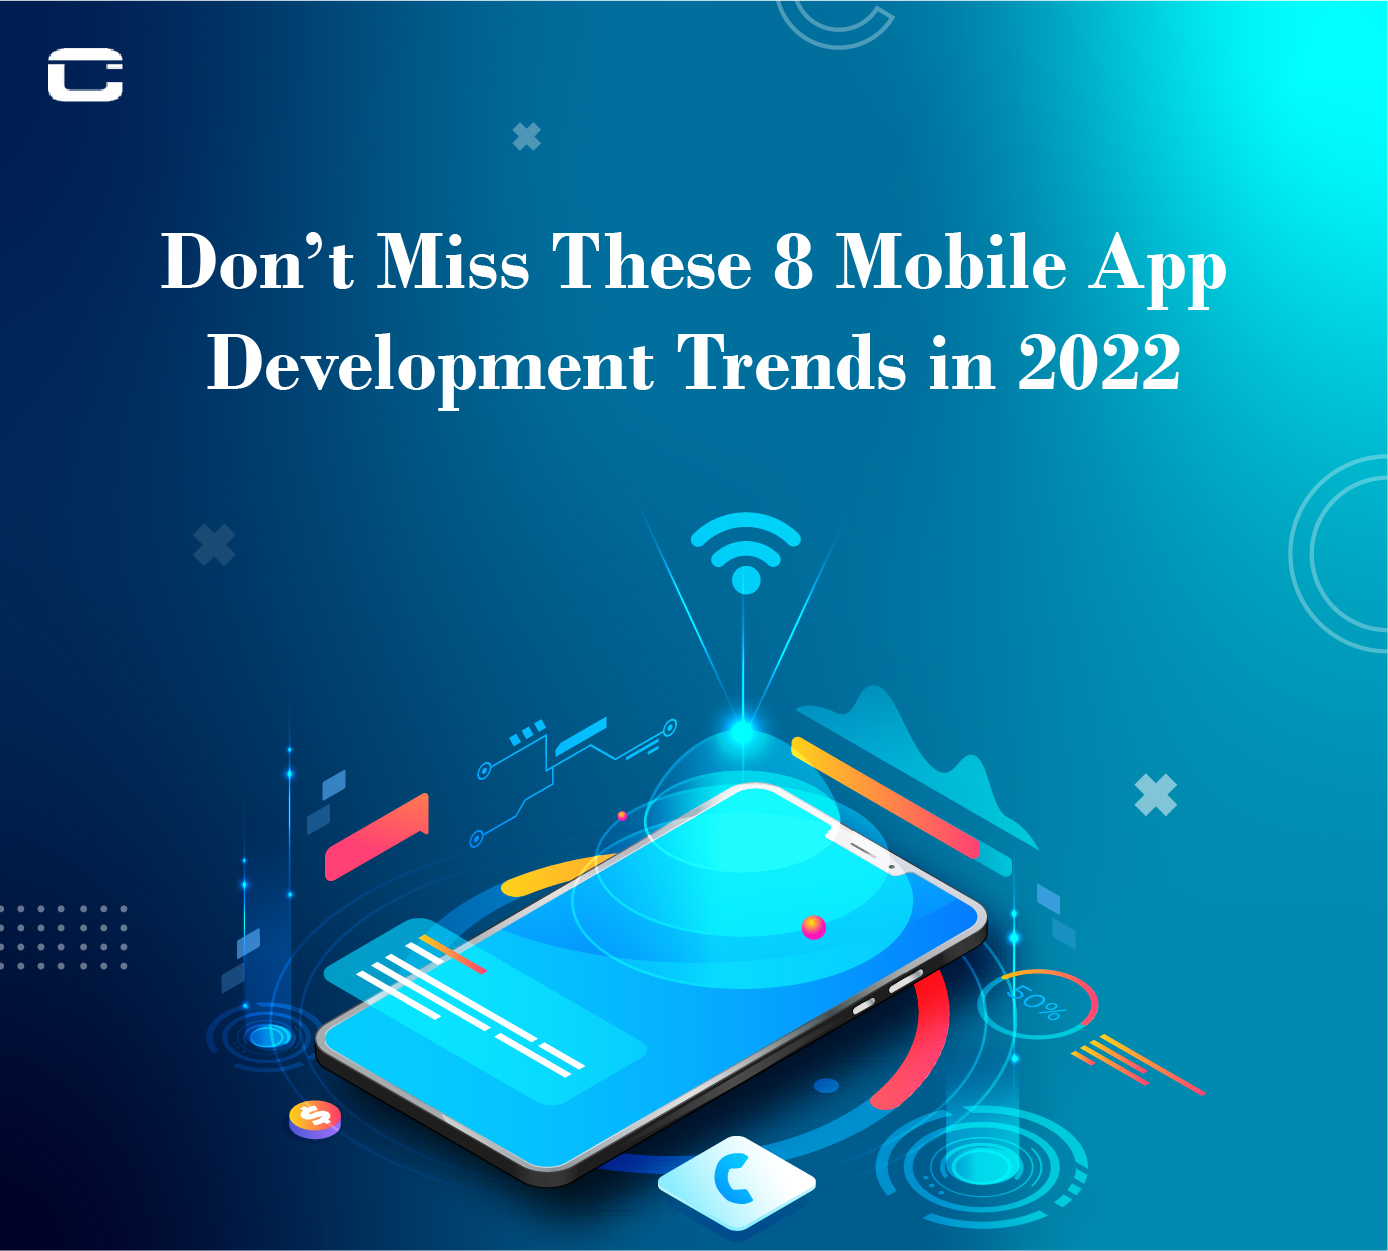 Don’t Miss These 8 Mobile App Development Trends in 2022